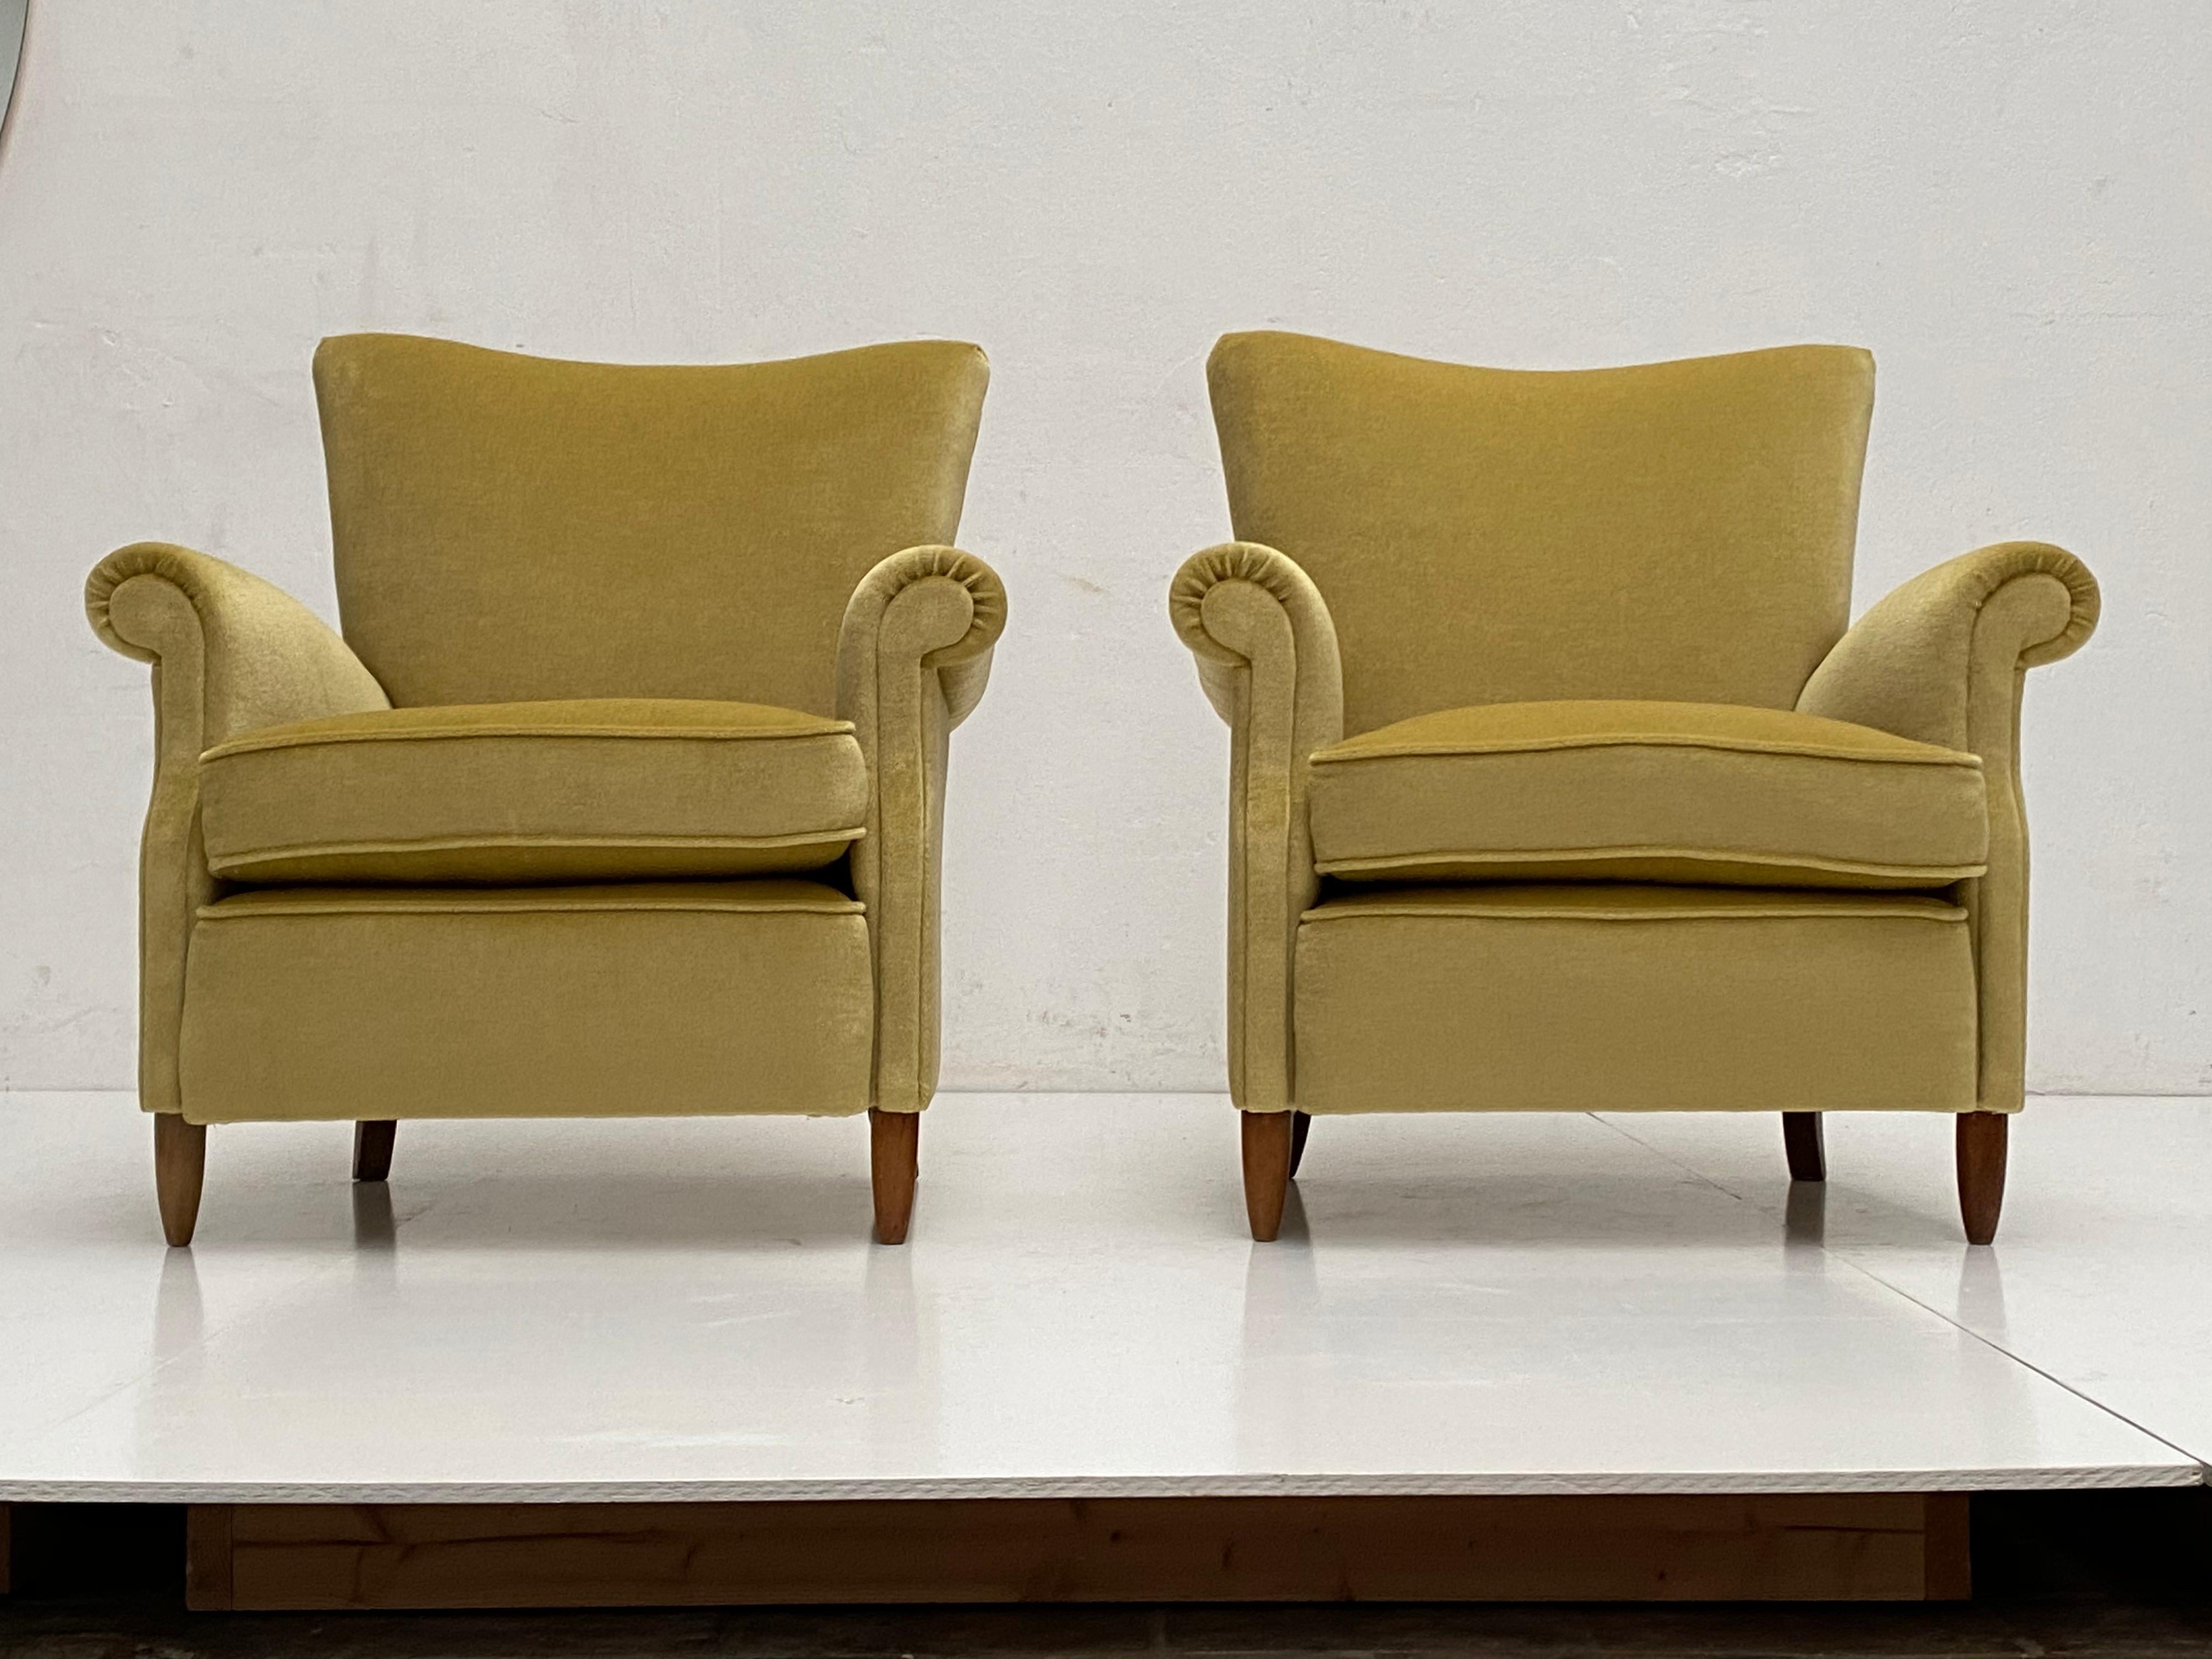 Mid-20th Century Pair of DUX Lounge Chairs Fully Restored in Mohair Velvet, Artifort, 1955 For Sale